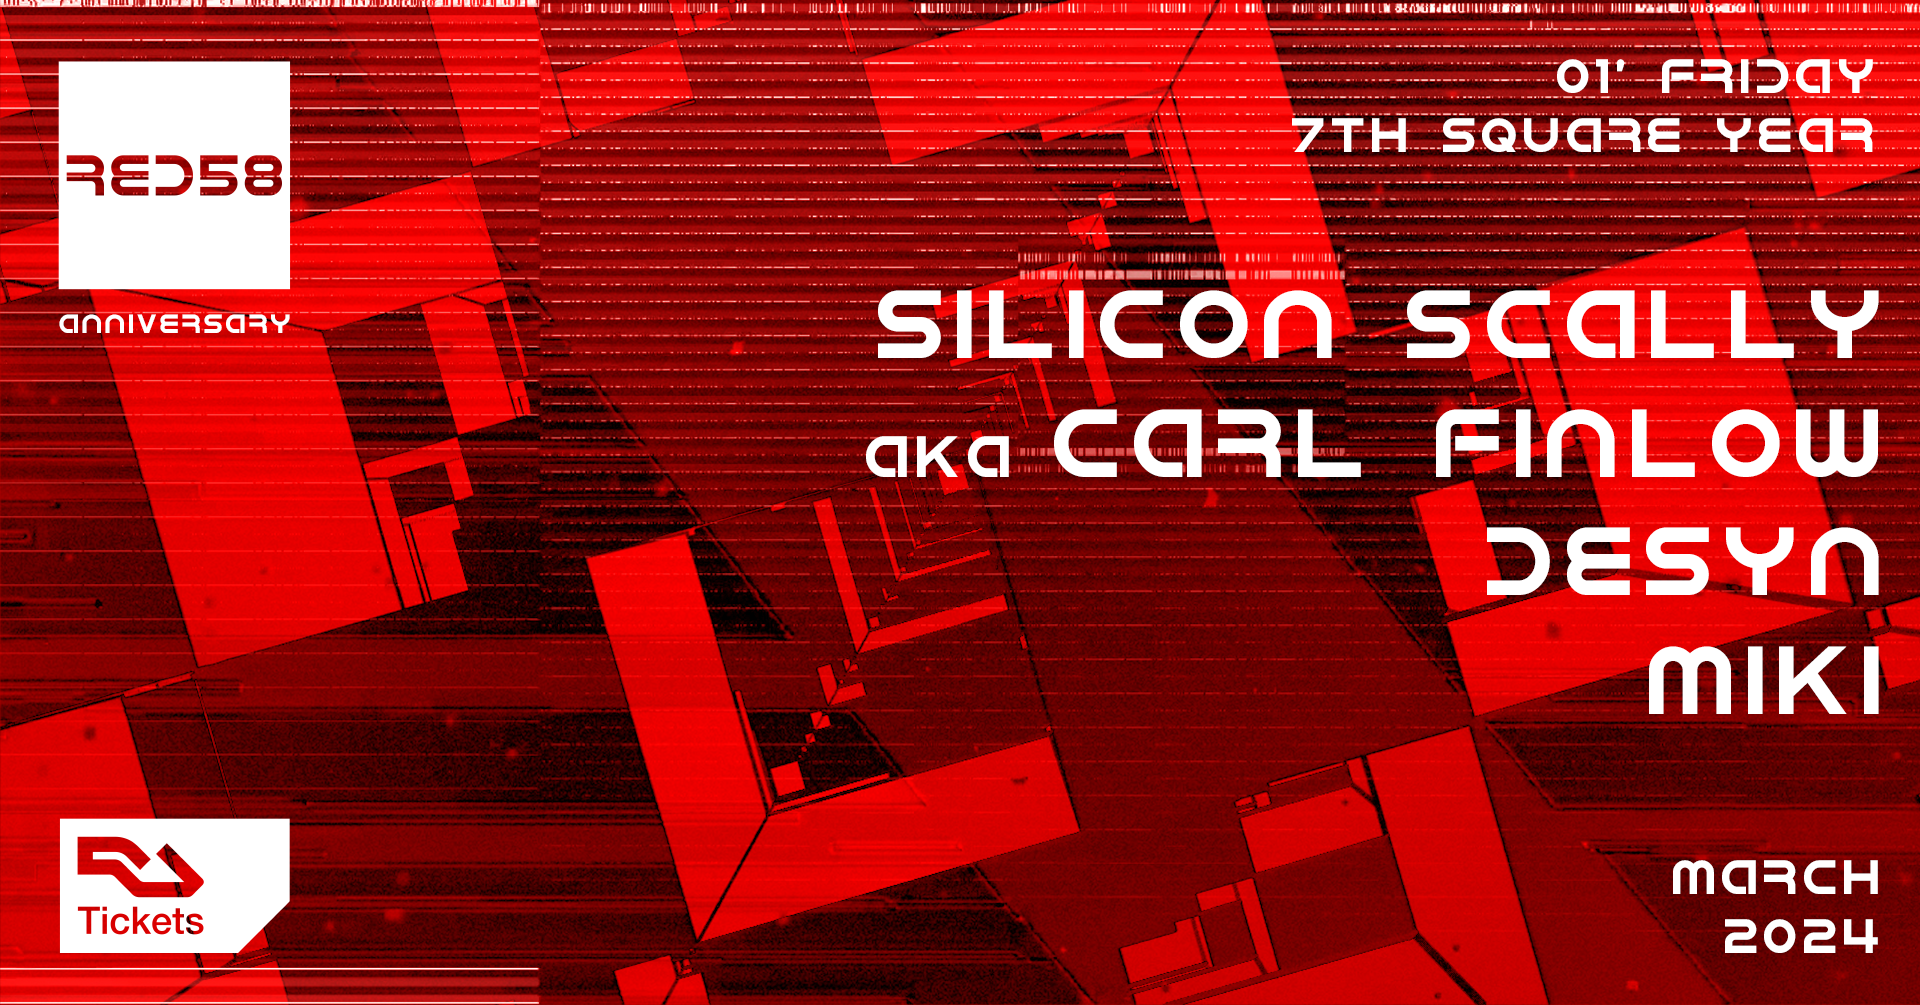 7th Square Year with Silicon Scally aka Carl Finlow, Desyn & Miki - フライヤー表